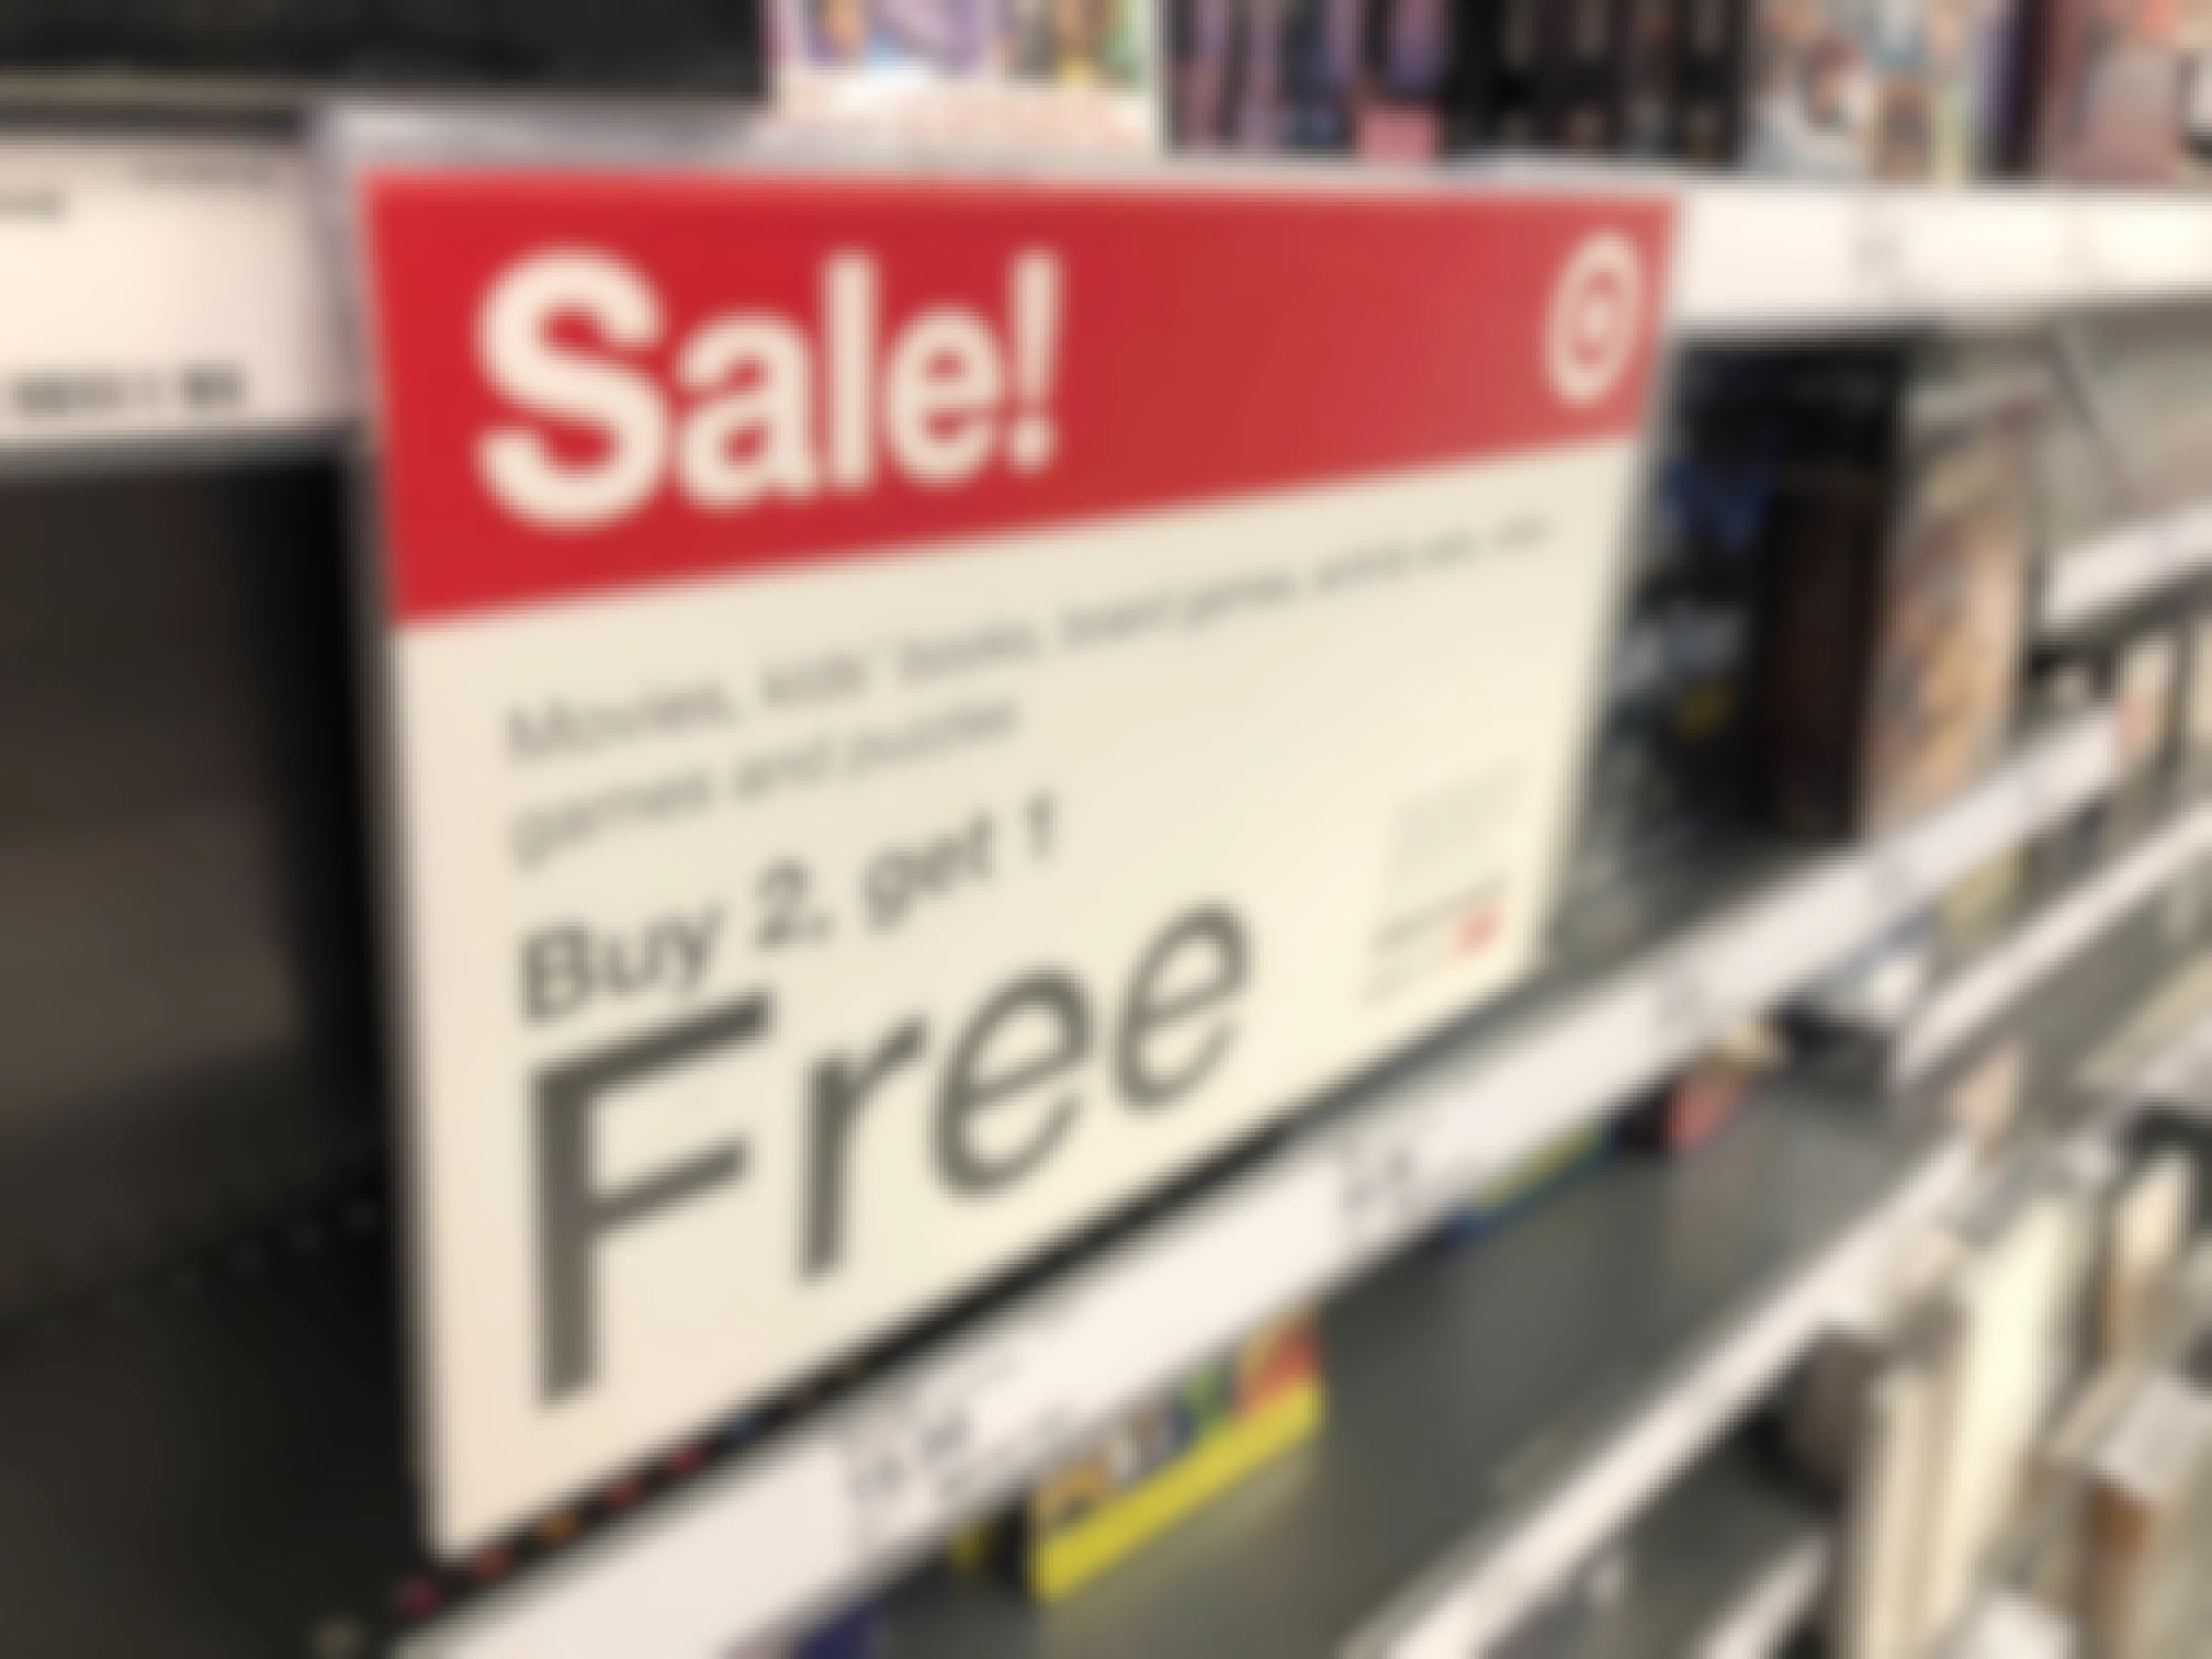 movies, kids' books, board games buy 2 get 1 free sign at target